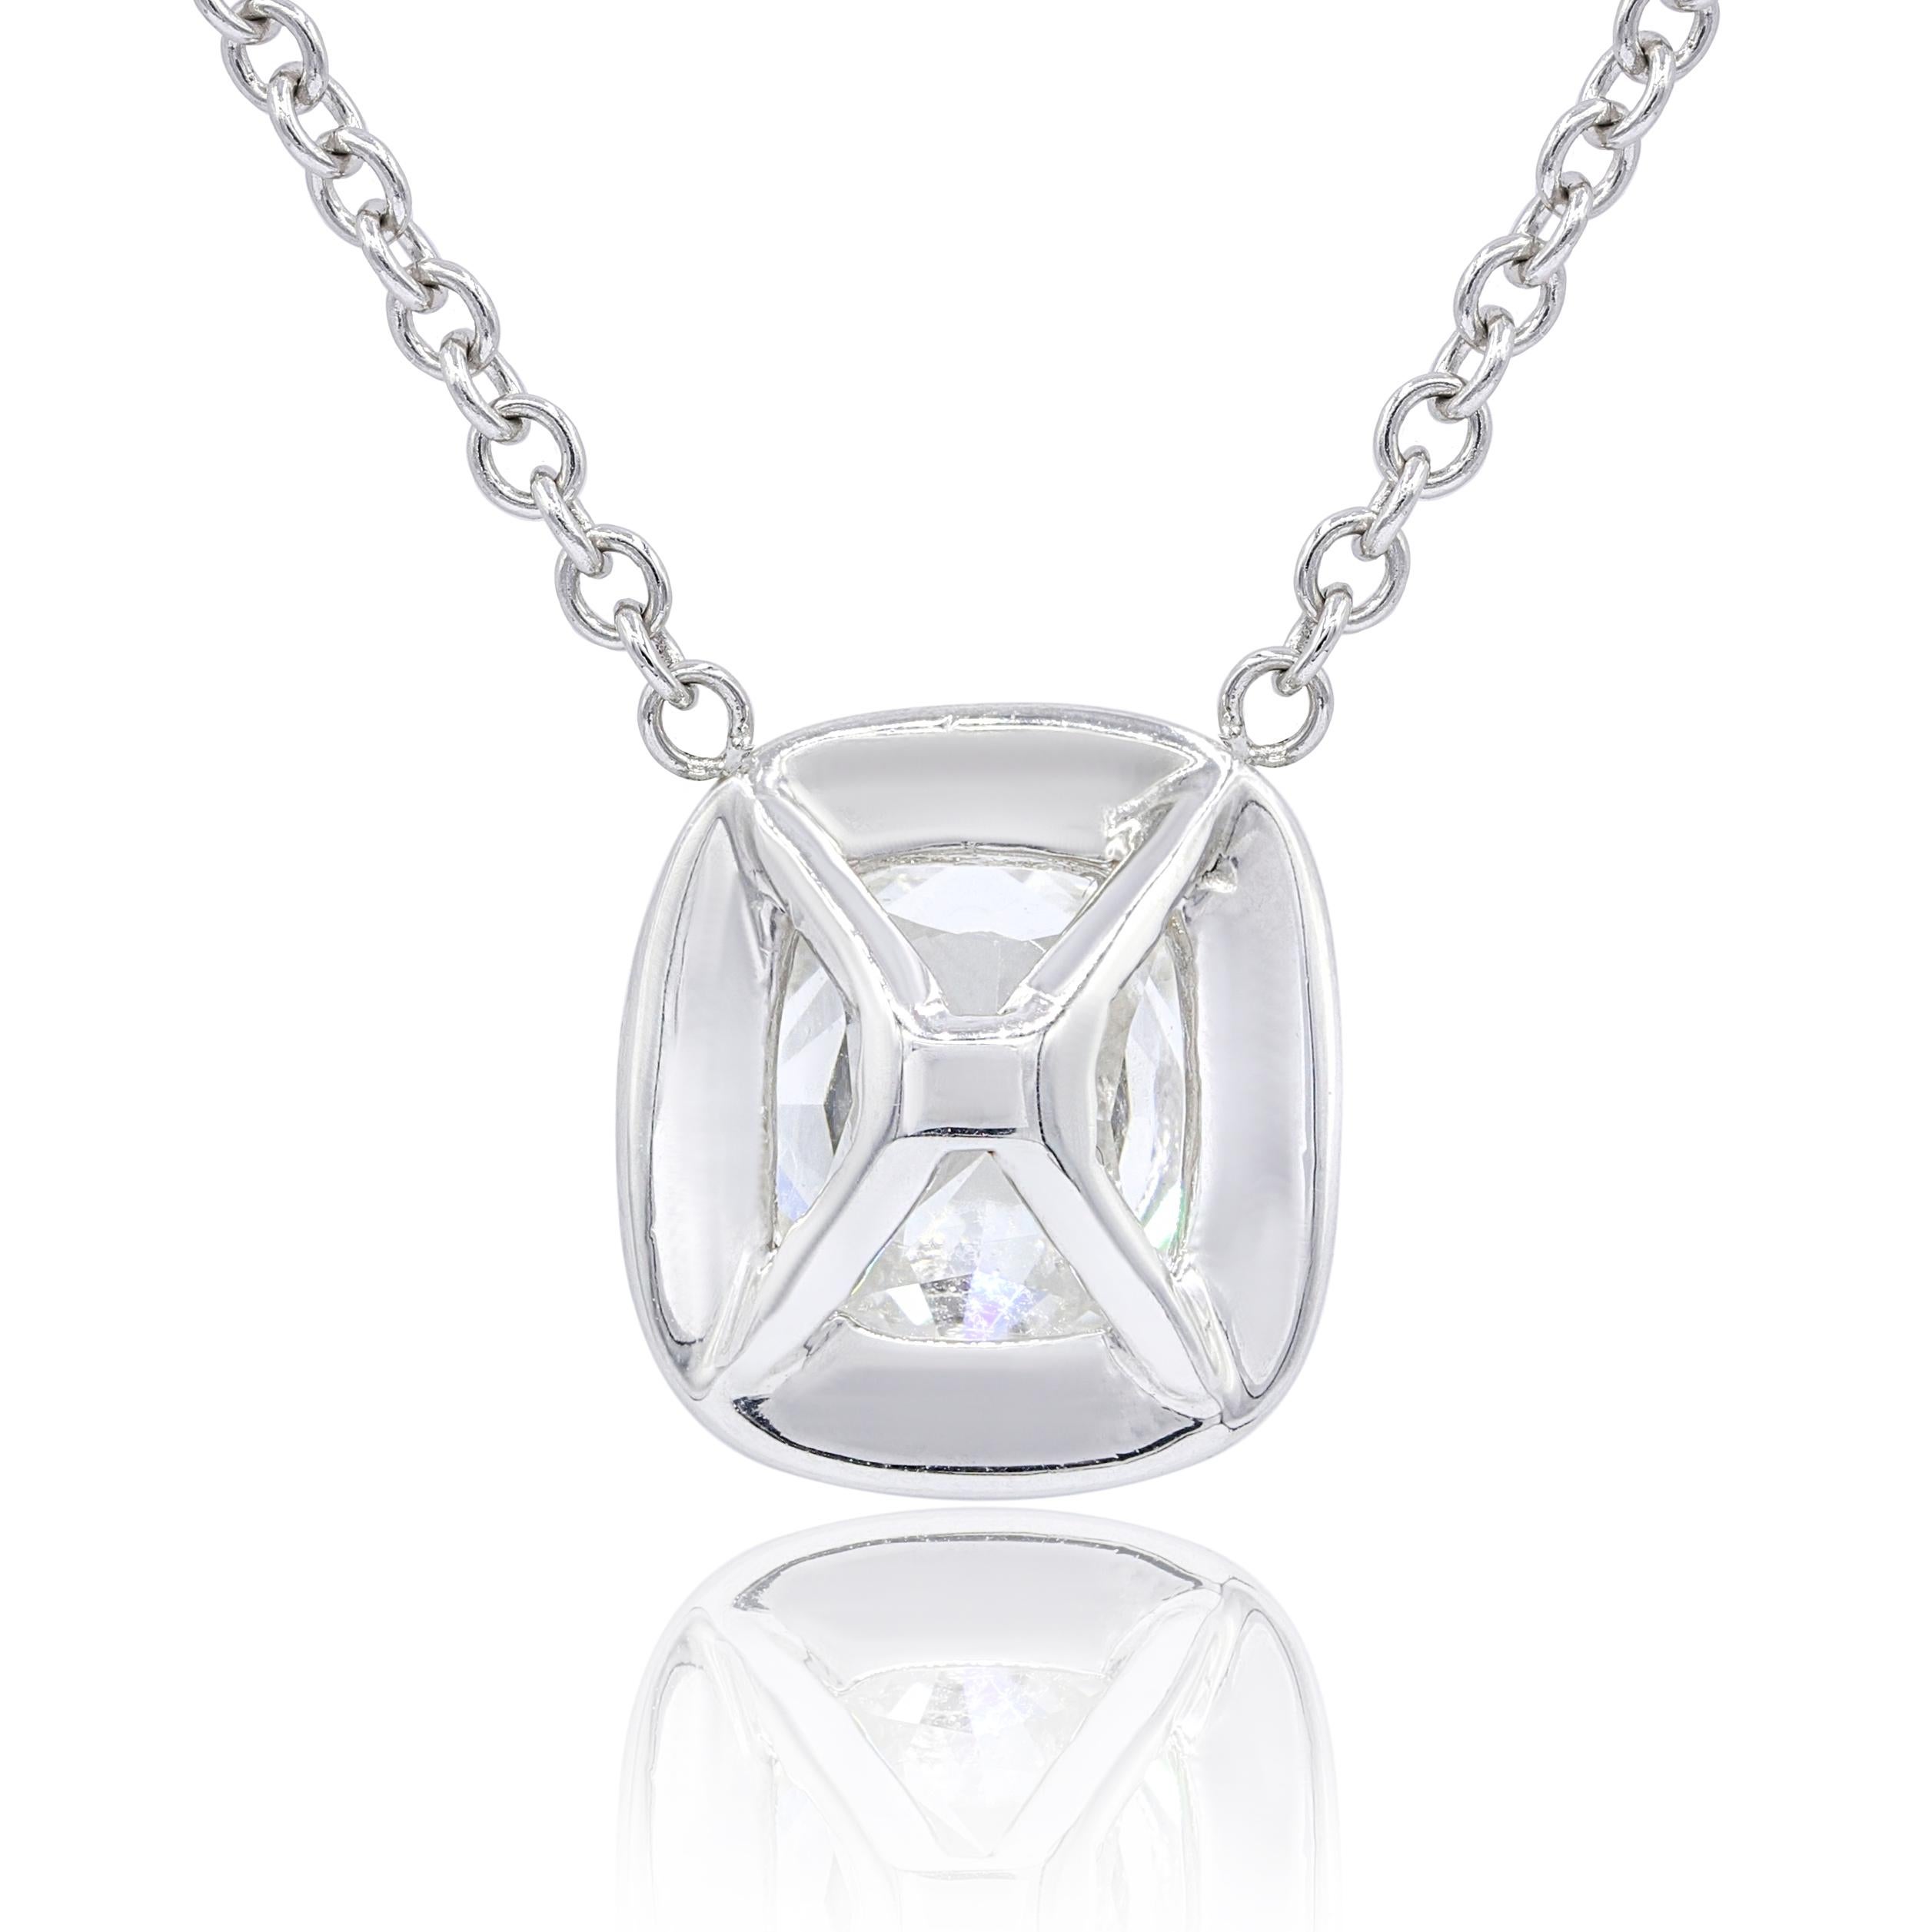 18KT white gold diamond pendant, feature 2.05ct GIA certified G-SI1 cushion diamond set in halo bezel with 0.65ct of round diamonds set on white gold chain.

This product comes with a GIA certificate
This product will be packaged in a custom